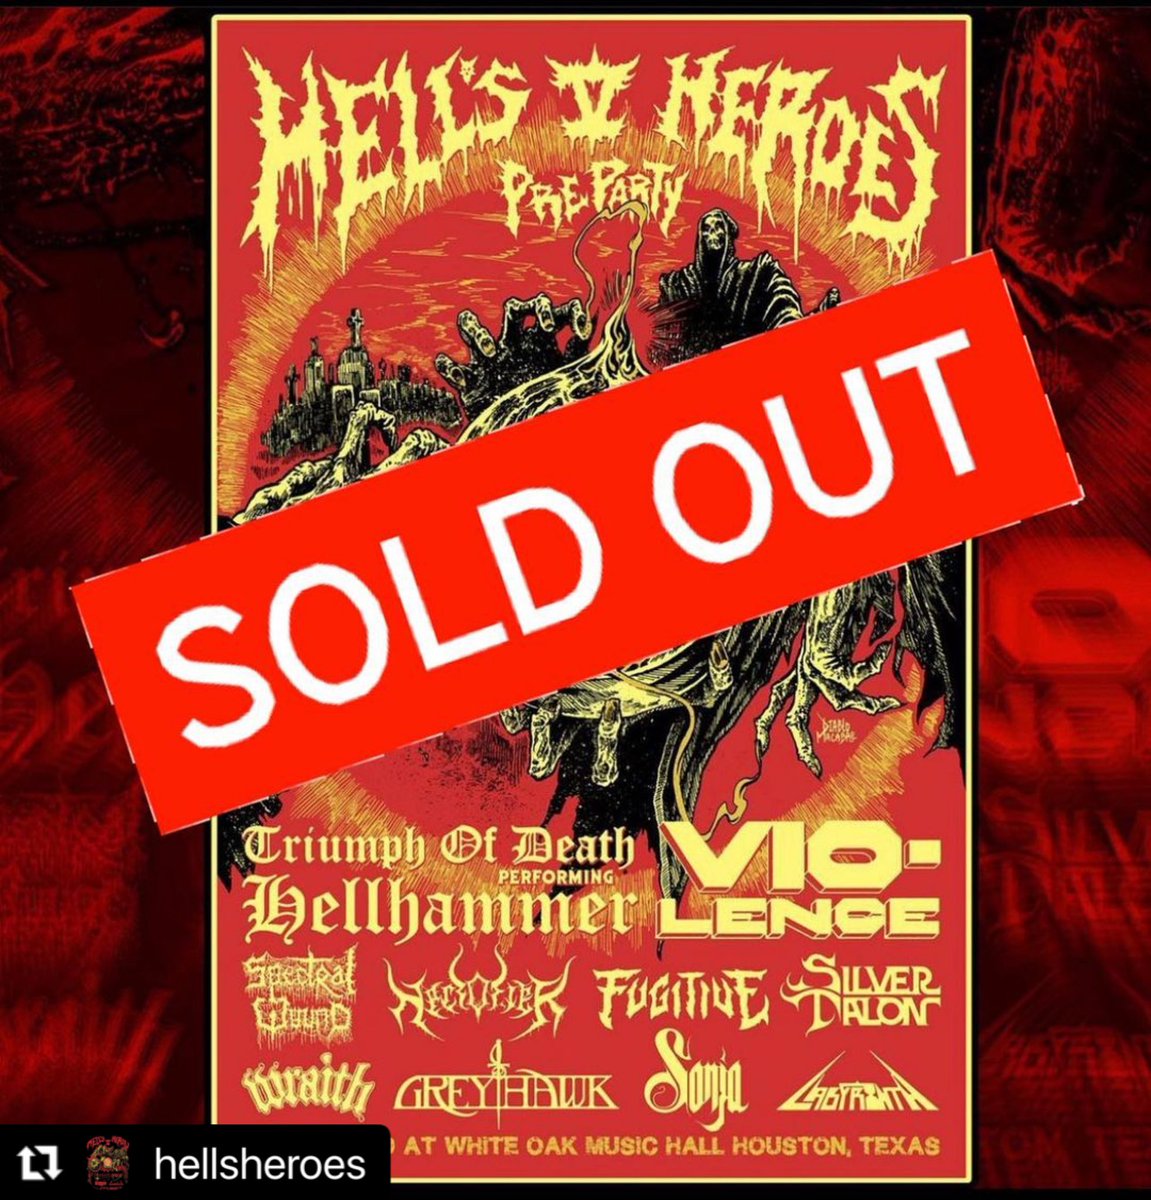 Hell’s Heroes Pre-Party is TONIGHT and SOLD OUT. We’re closing it down on the upstairs stage at 10:20 after VIO-LENCE and before Triumph of Death. See you soon! . #silvertalon #hellsheroes #heavymetal